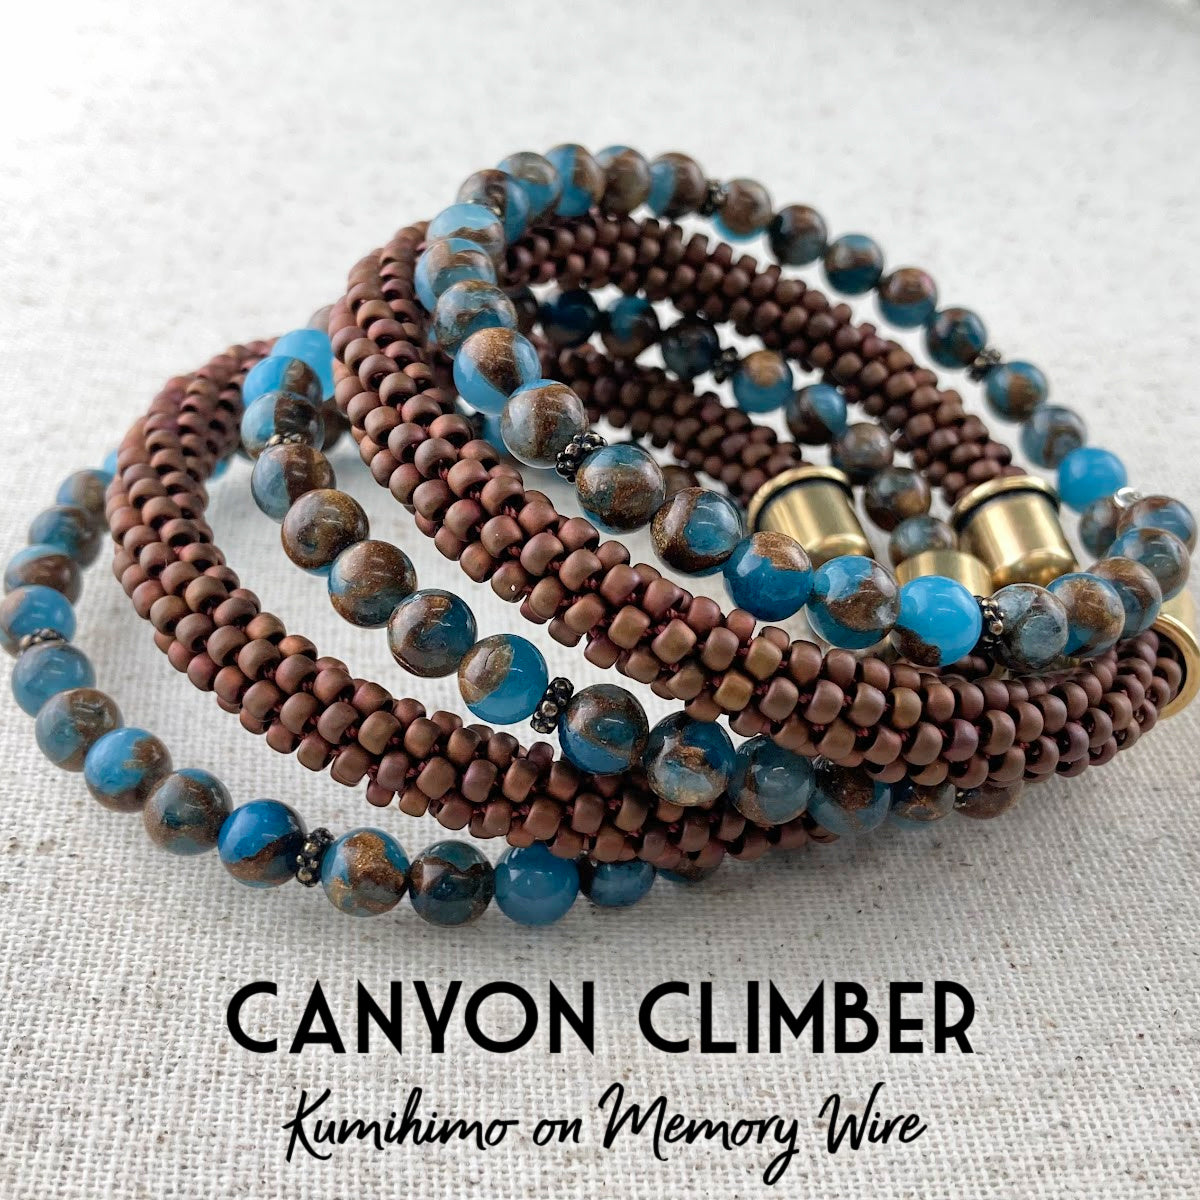 Canyon Climber Bracelet.  Five wrap memory wire bracelet with two wraps of beaded kumihimo and three wraps of blue jasper stone beads.